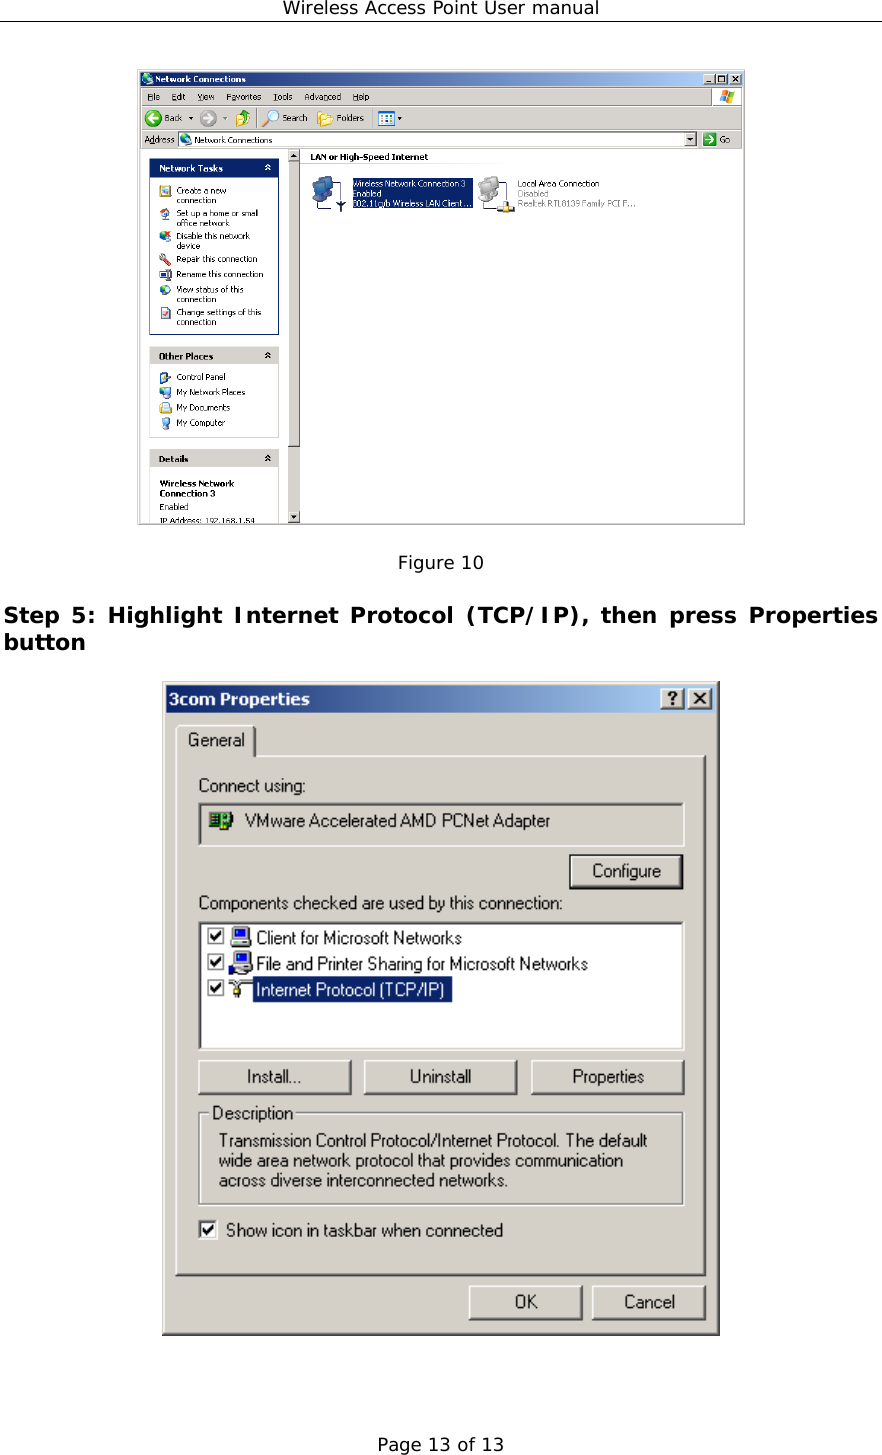 Wireless Access Point User manual Page 13 of 13   Figure 10  Step 5: Highlight Internet Protocol (TCP/IP), then press Properties button     